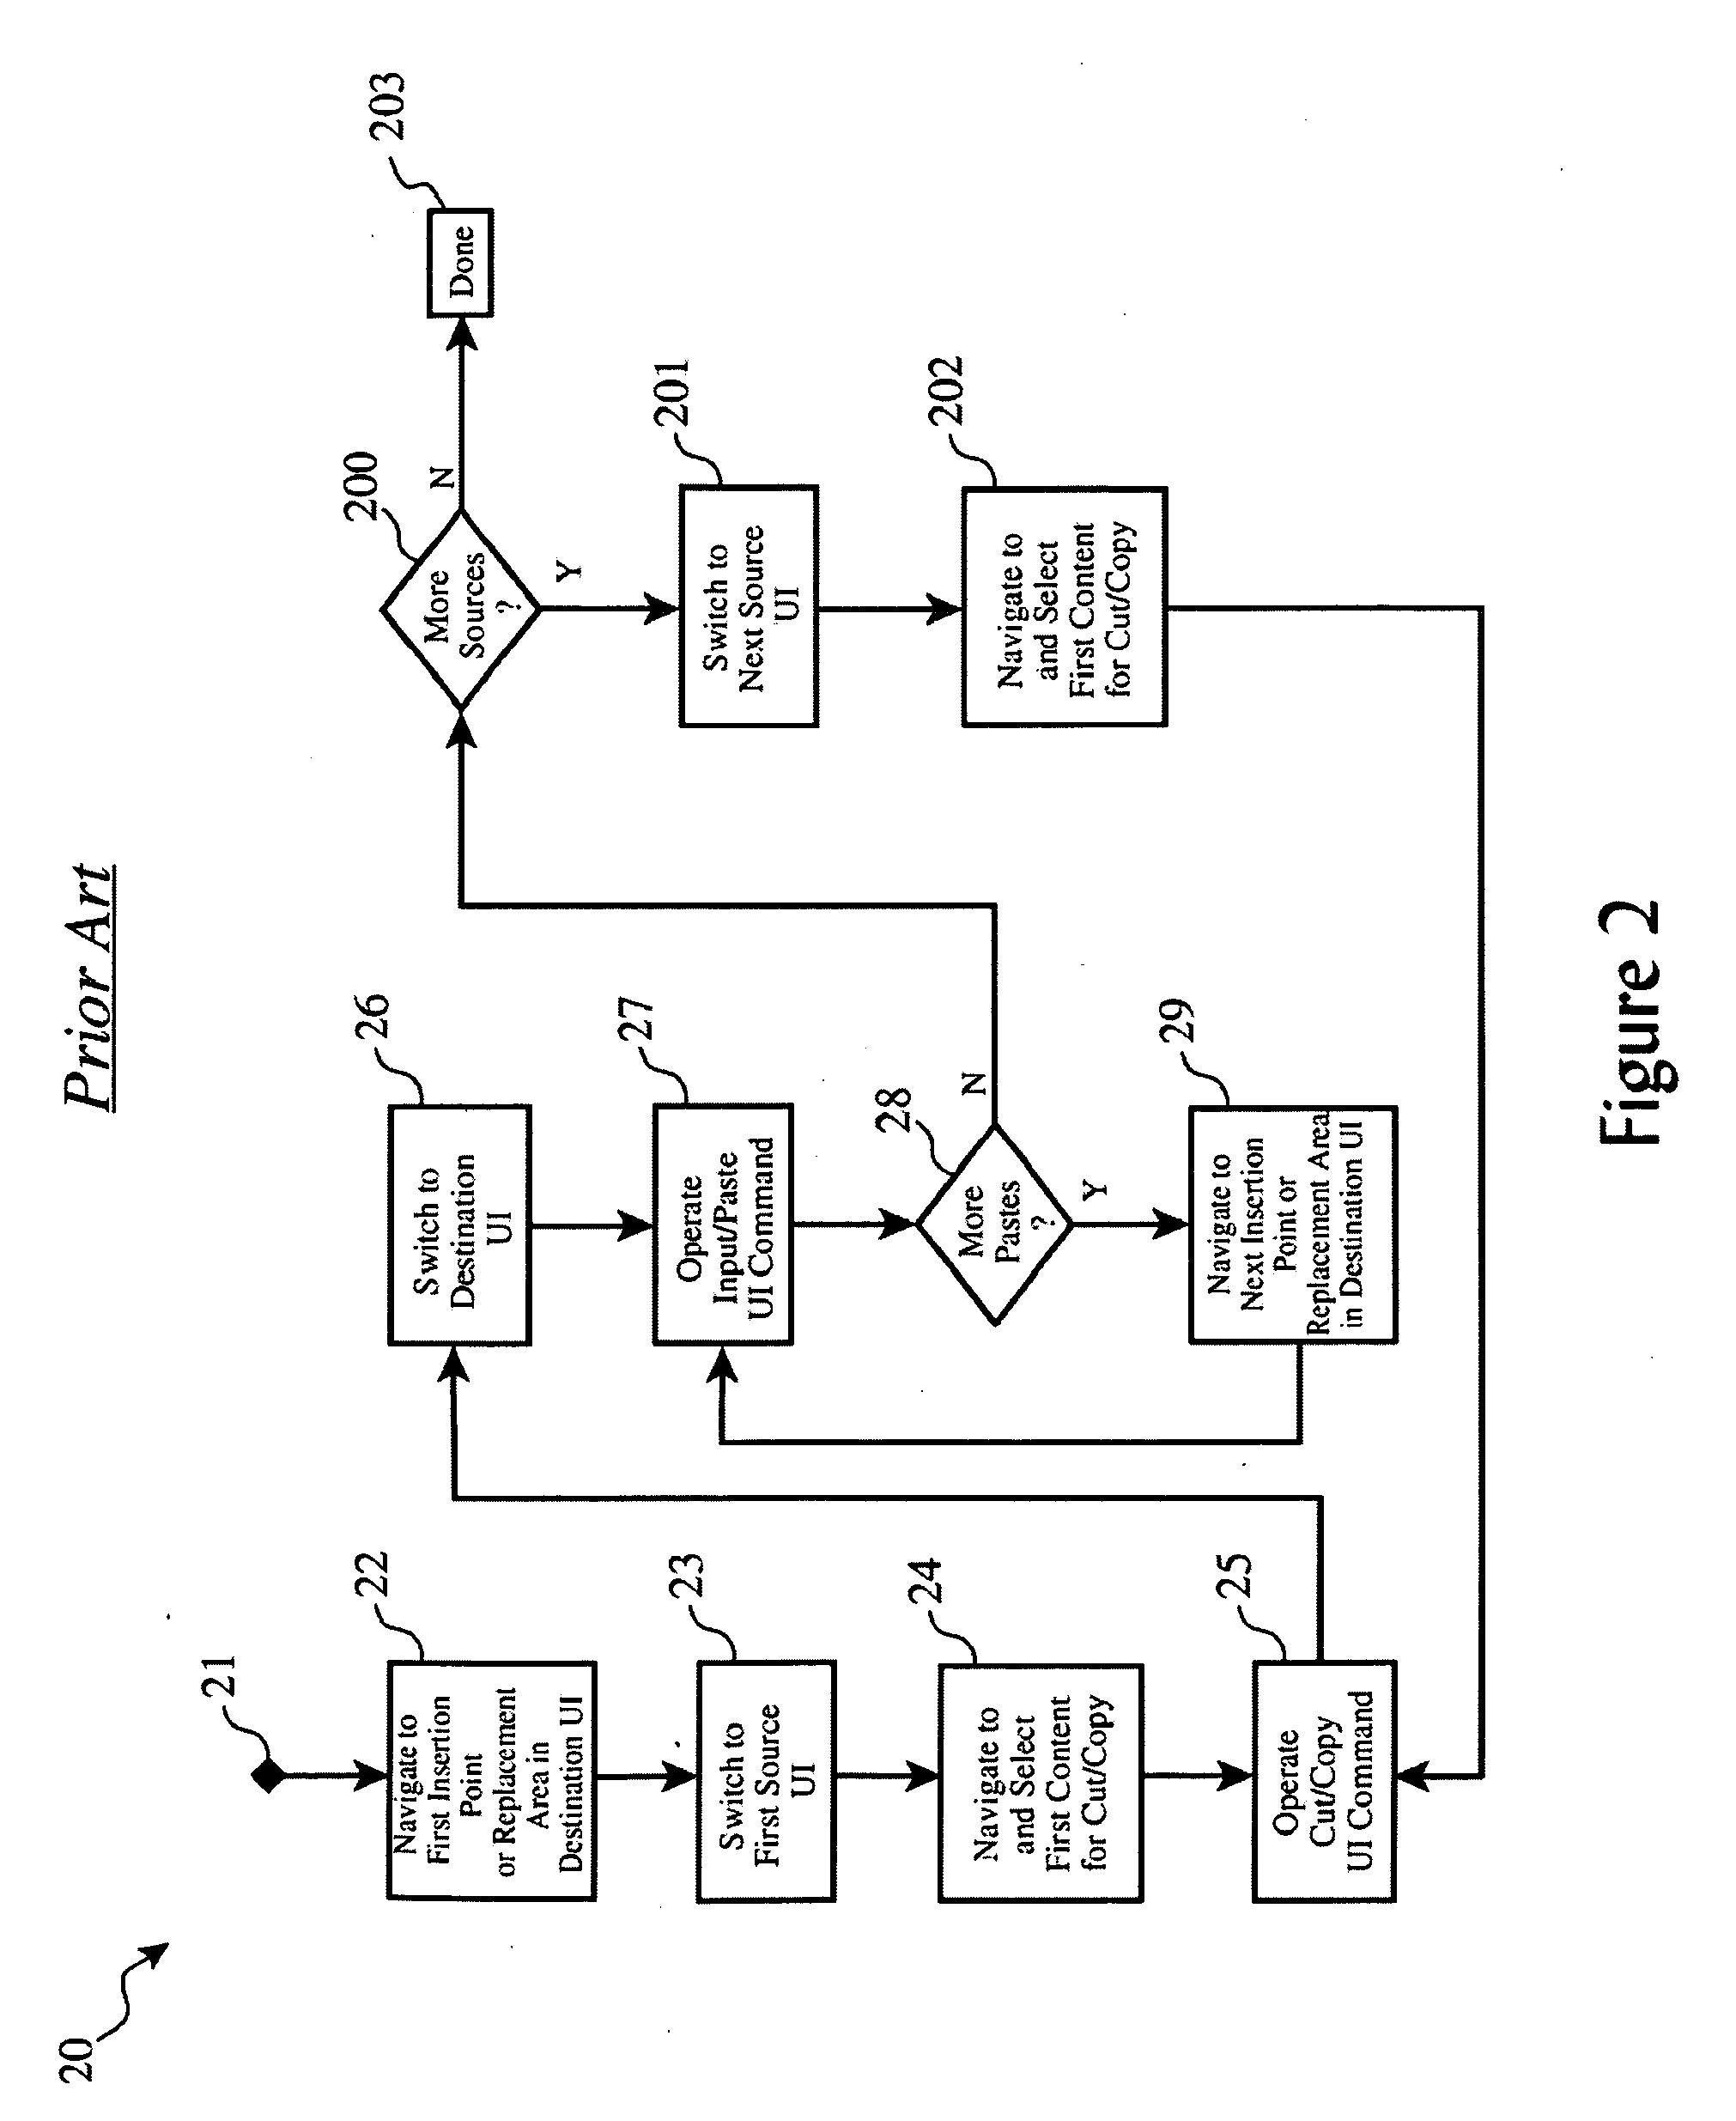 System and Method for Automatic Natural Language Translation of Embedded Text Regions in Images During Information Transfer